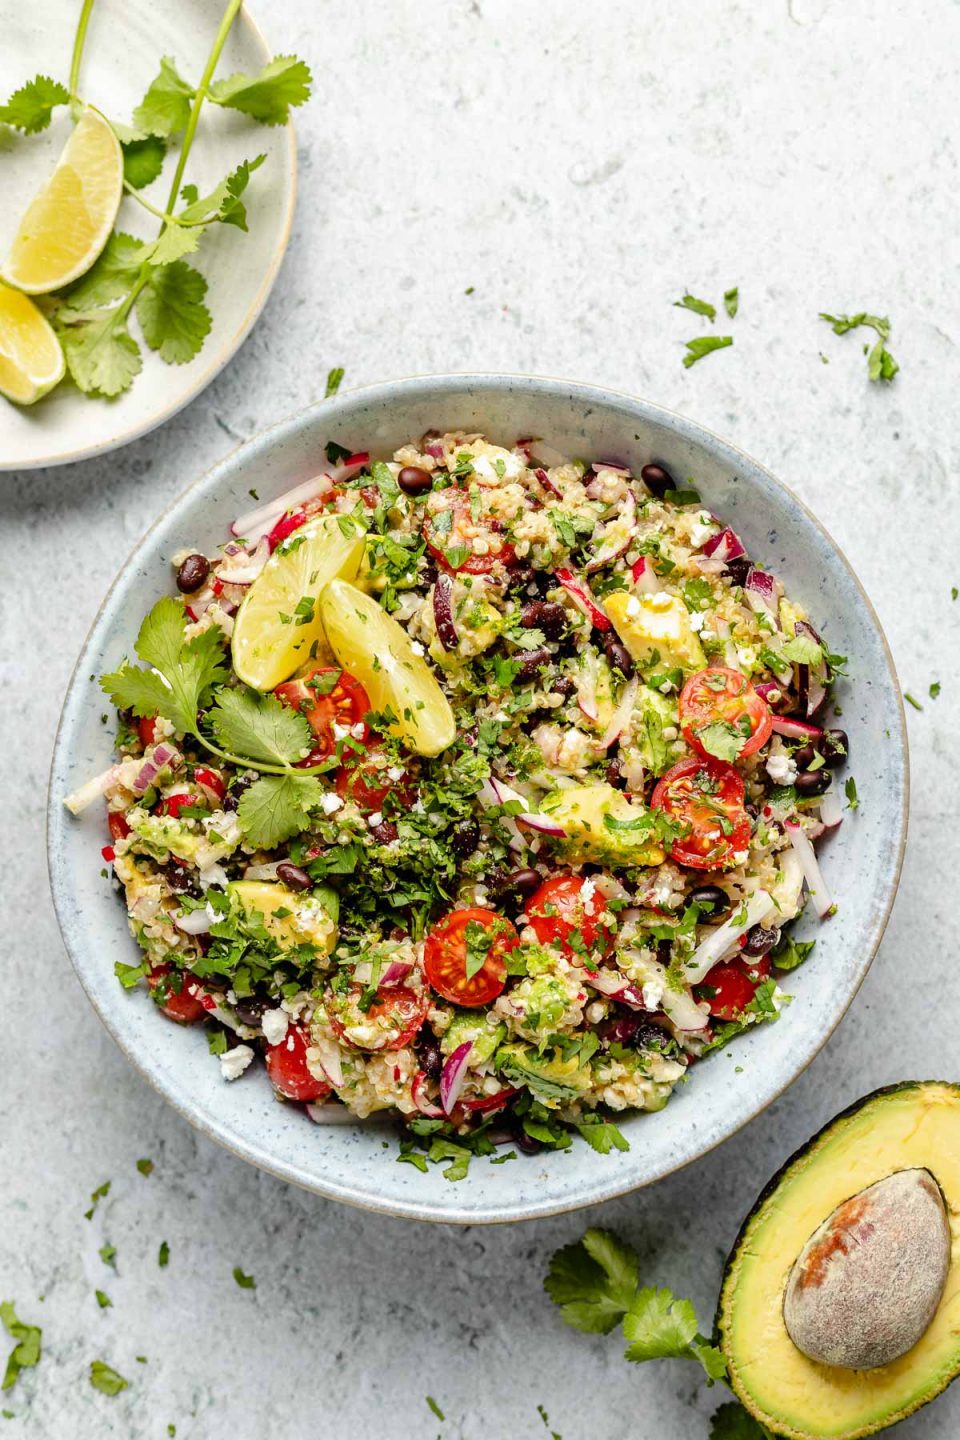 Southwest quinoa salad shown in light blue serving bowl, topped with fresh cilantro & lime wedges. The bowl sits atop a light blue surface, surrounded by chopped cilantro, lime wedges, & halved avocado.